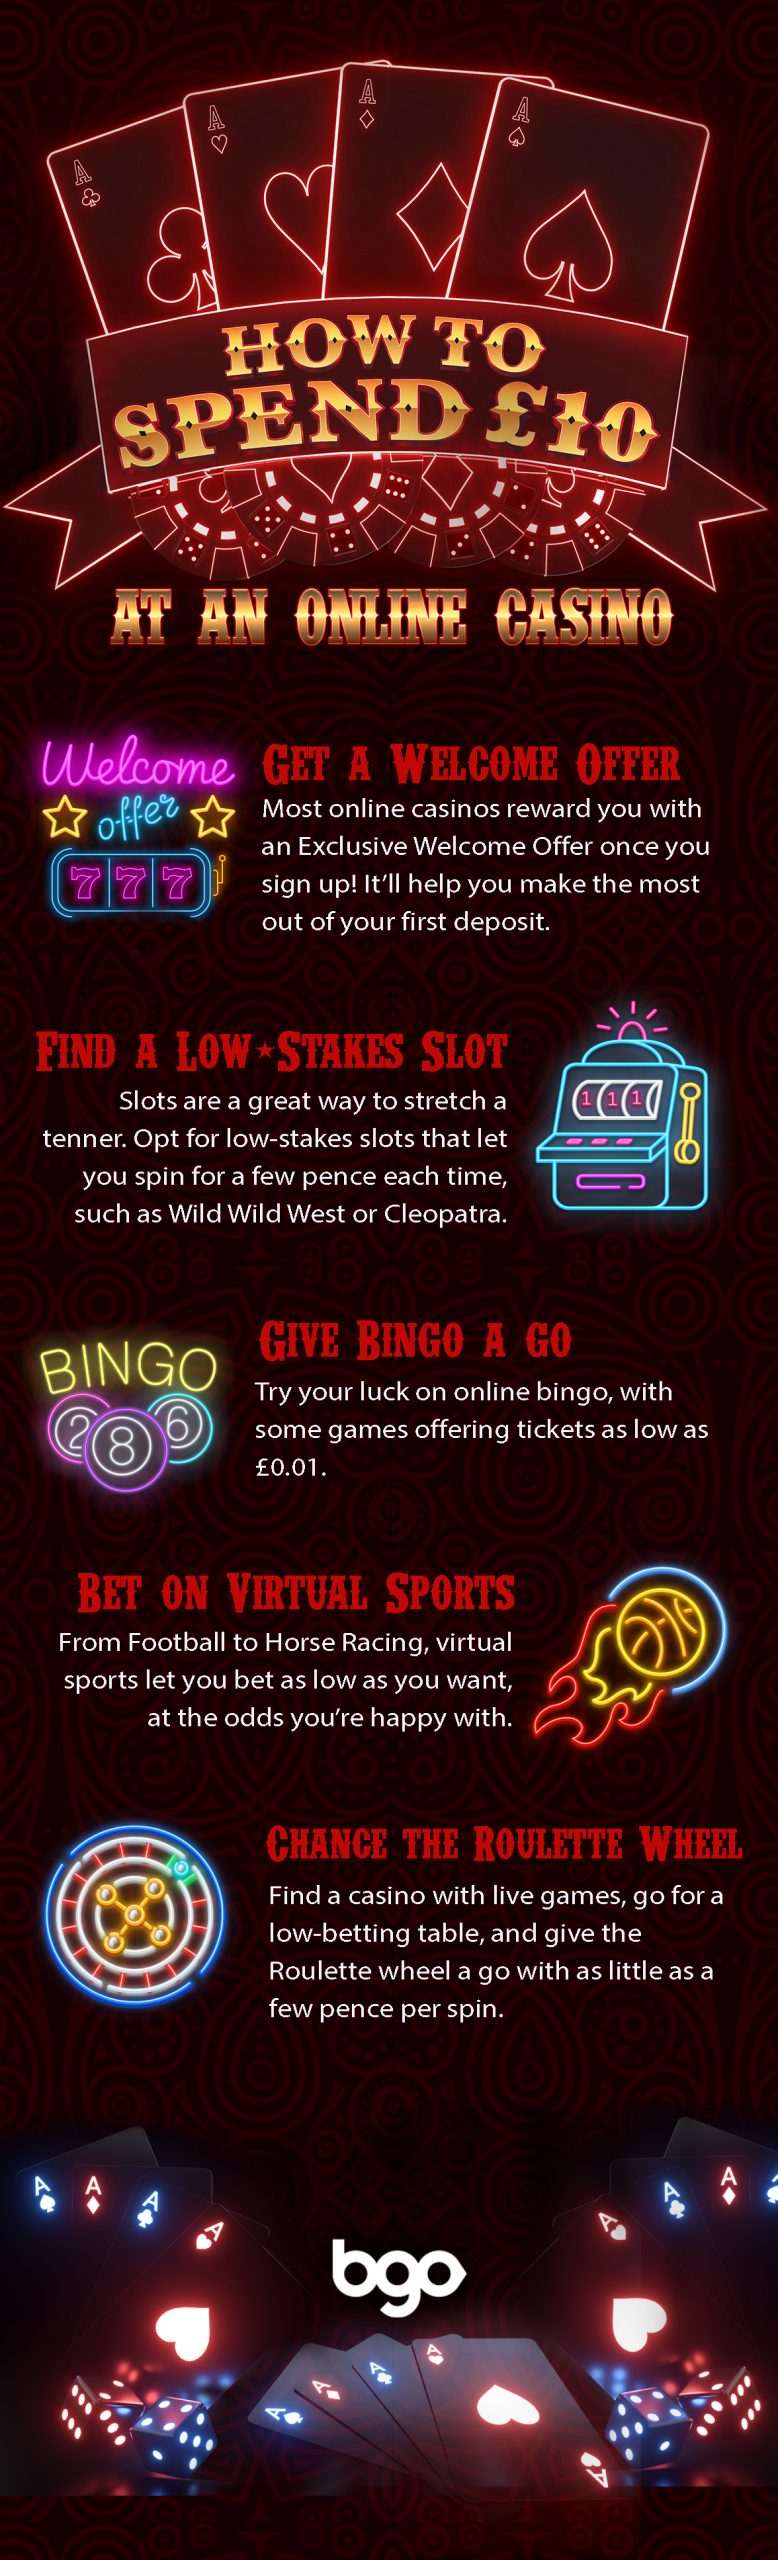 How to Spend 10 at an online casino infographic scaled